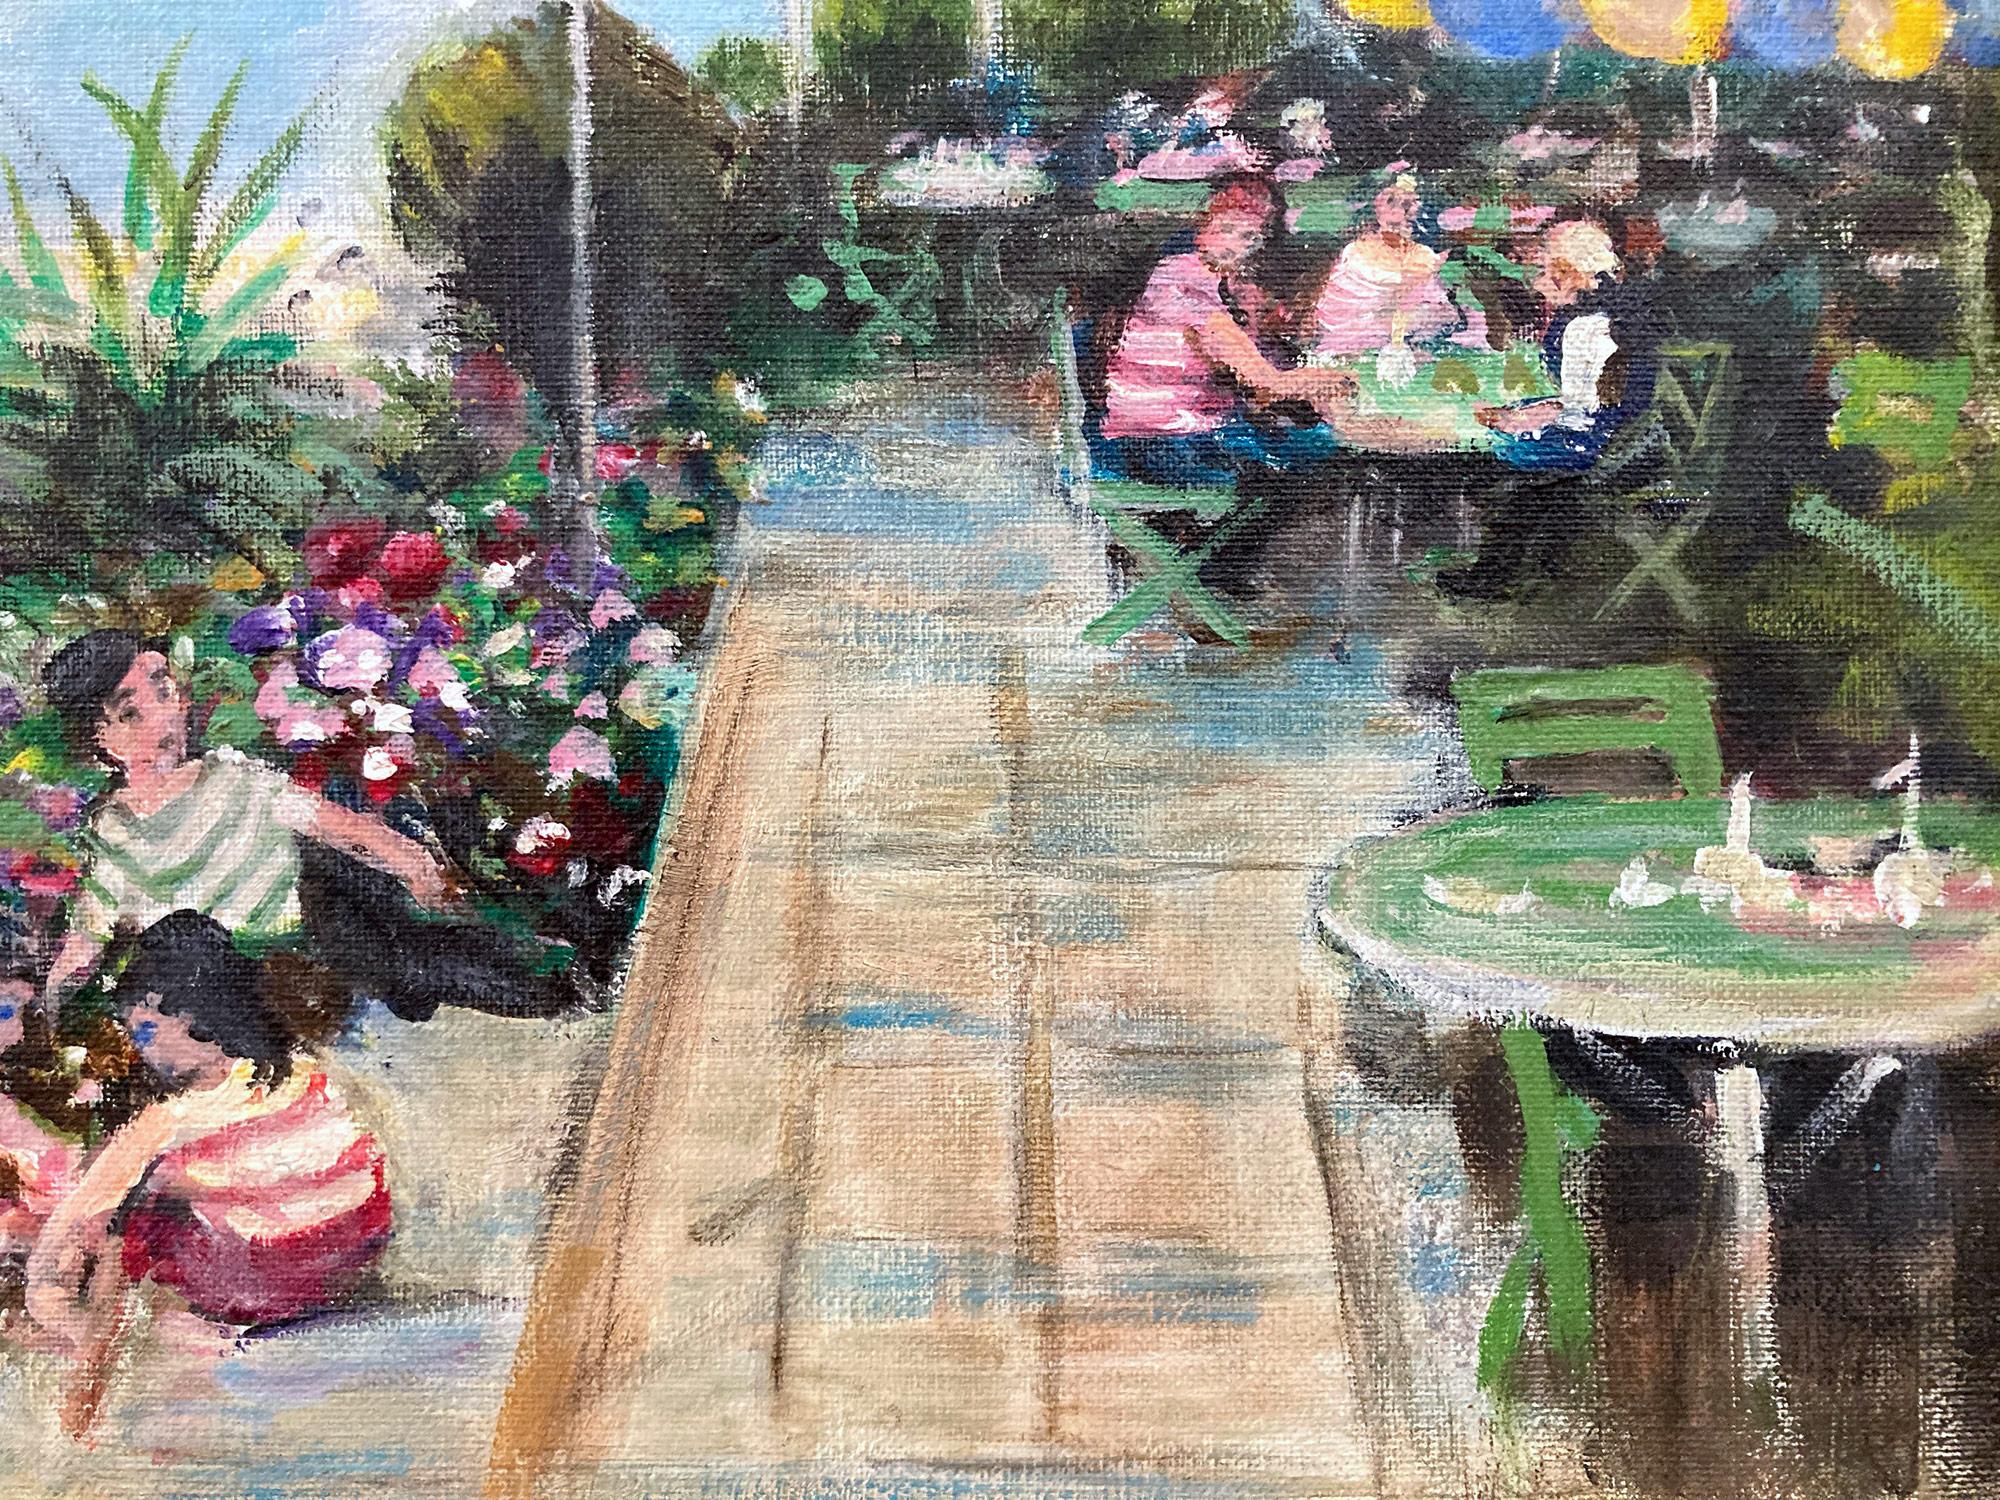 An exceptional impressionistic depiction of an afternoon at the Waterfront Cafe in Paris by Jules René Hervé. This piece takes place on a summer day with busy activities of figures leaning over the side of the cafe as children play with sailboats in